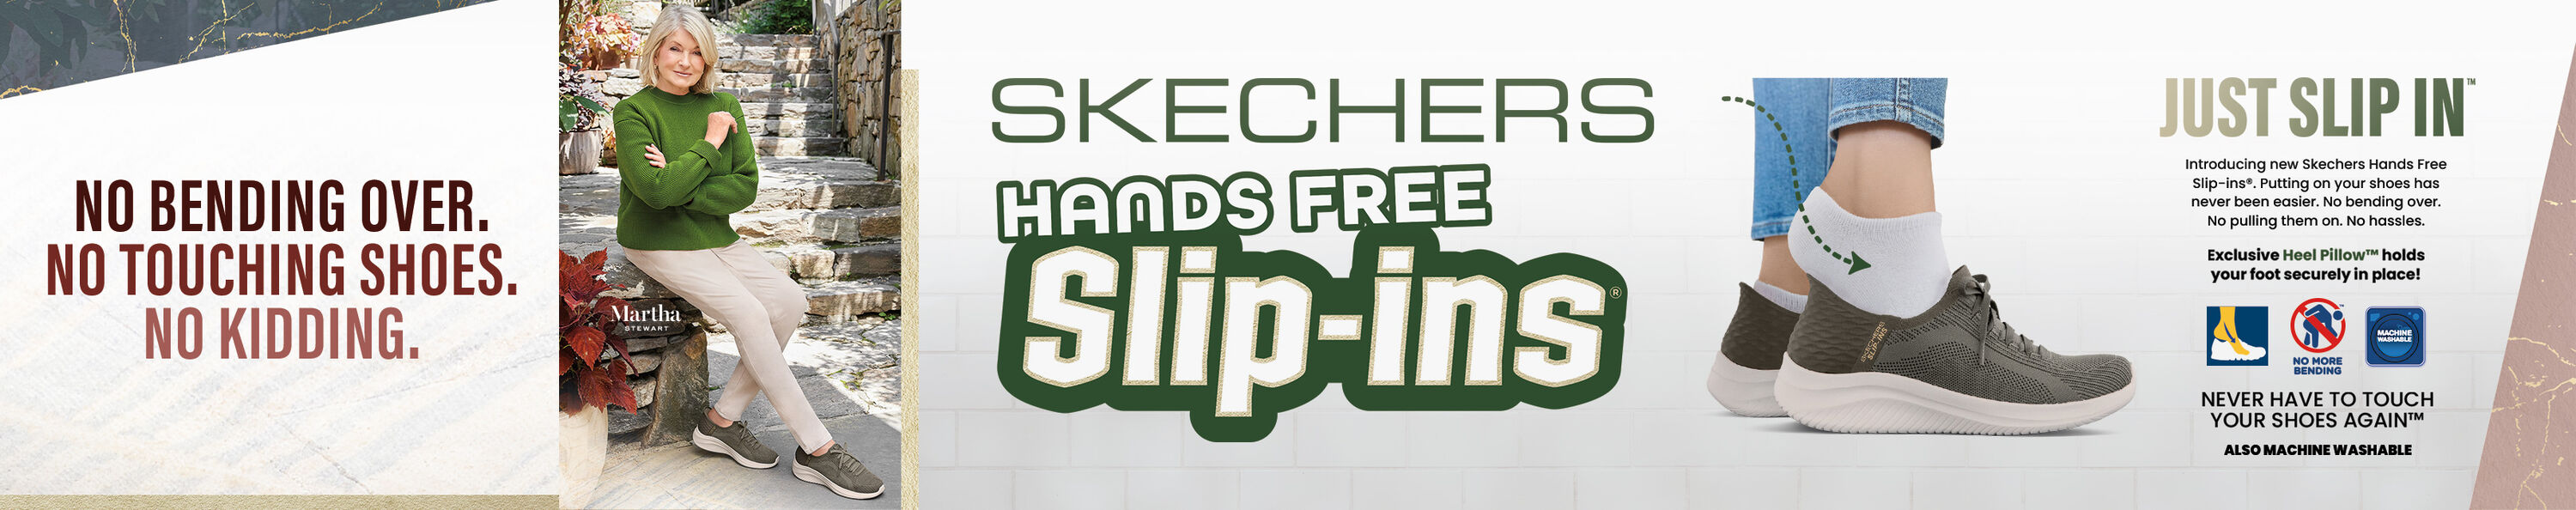 Hands Free Slip-ins | Step In Shoes | SKECHERS